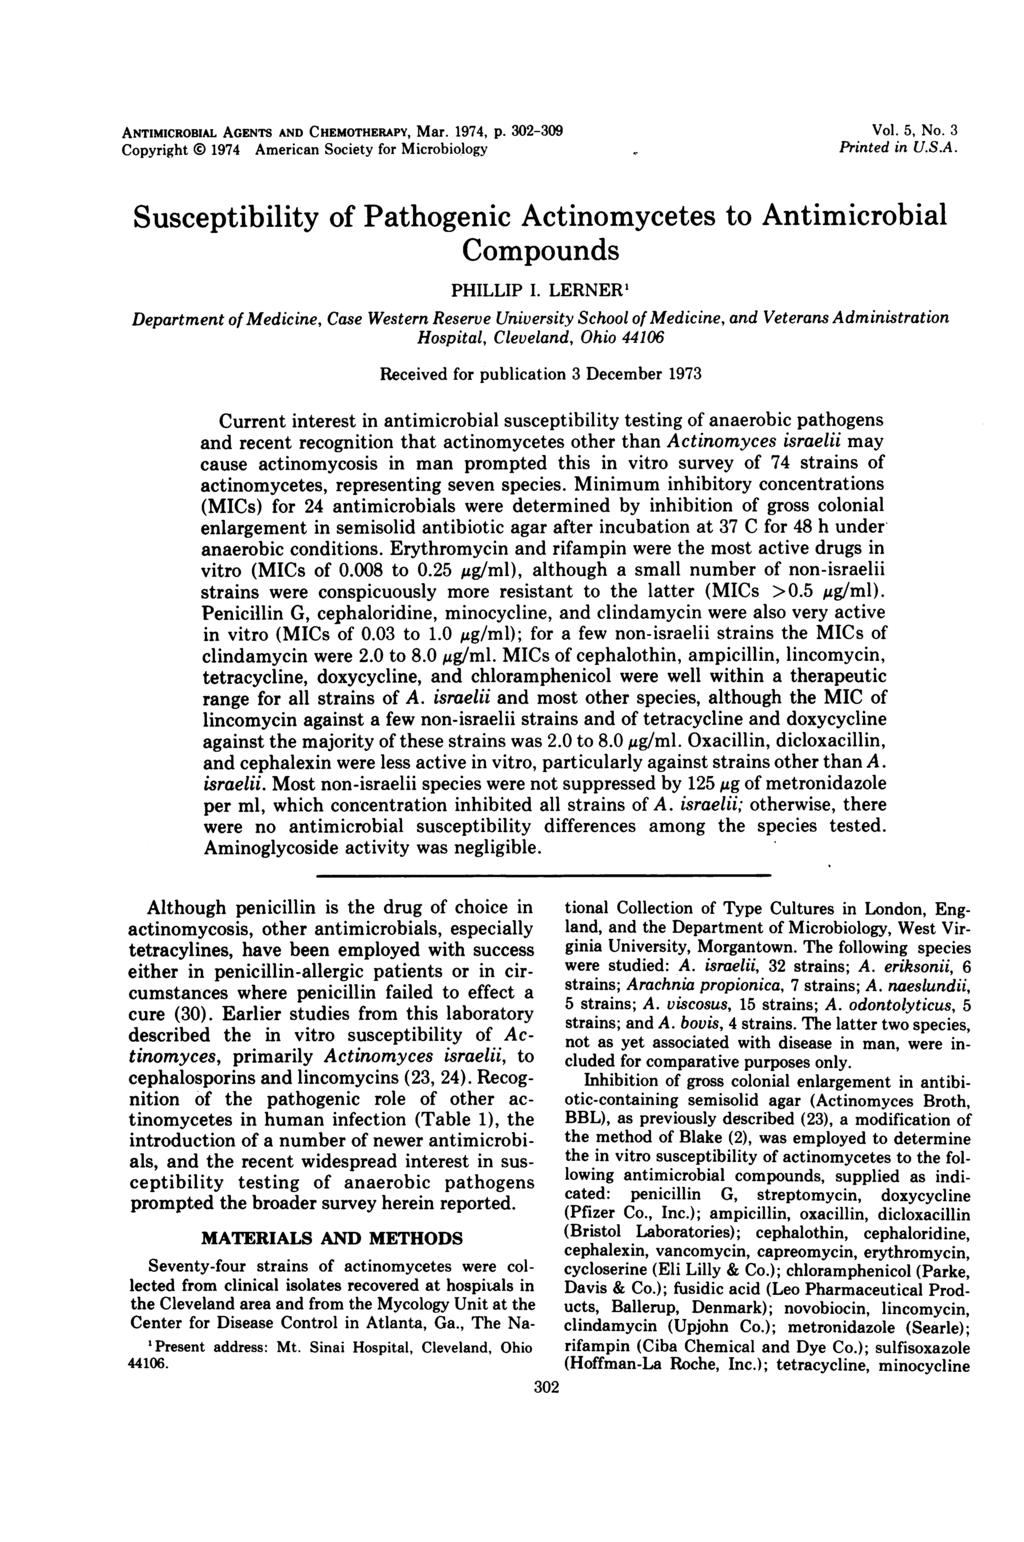 ANTIMICROBIAL AGENTS AND CHEMOTHERAPY, Mar. 1974, p. 302-309 Copyright 0 1974 American Society for Microbiology Vol. 5, No. 3 Printed in U.S.A. Susceptibility of Pathogenic Actinomycetes to Antimicrobial Compounds PHILLIP I.